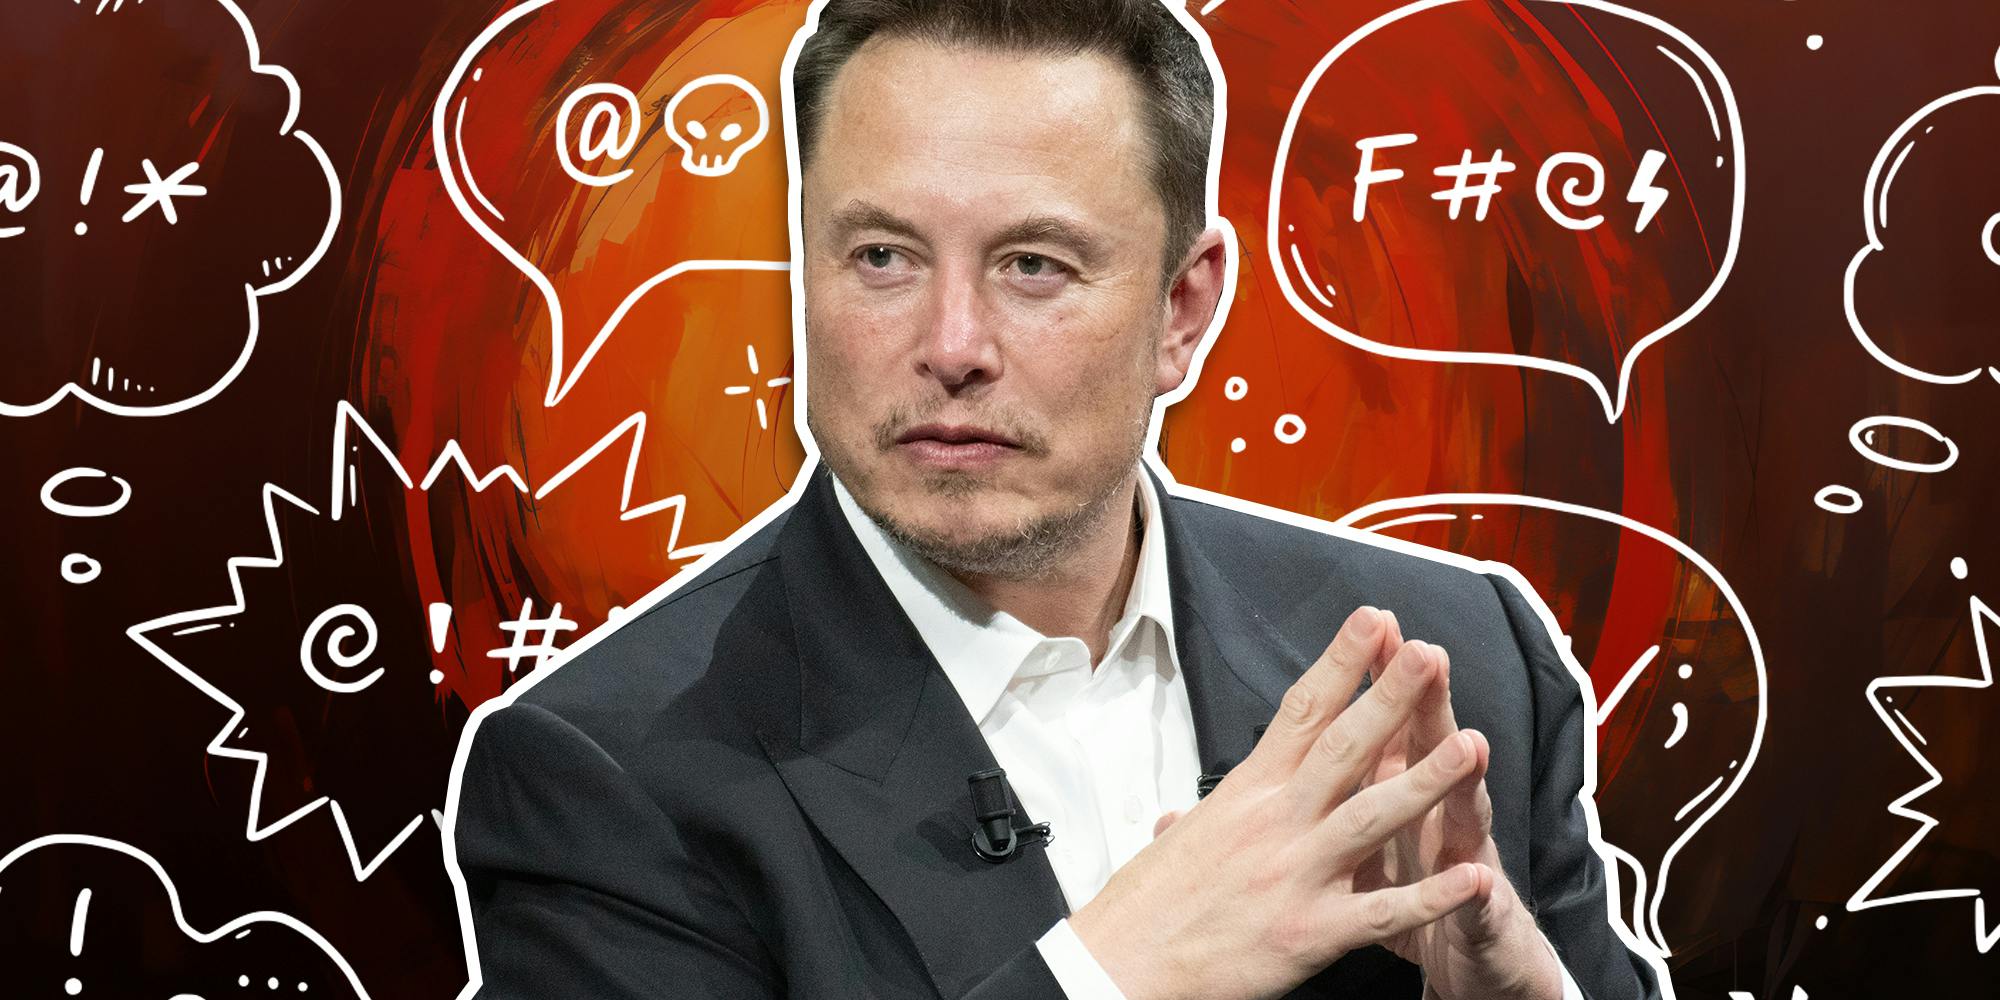 Elon Musk Only Cares About His Free Speech